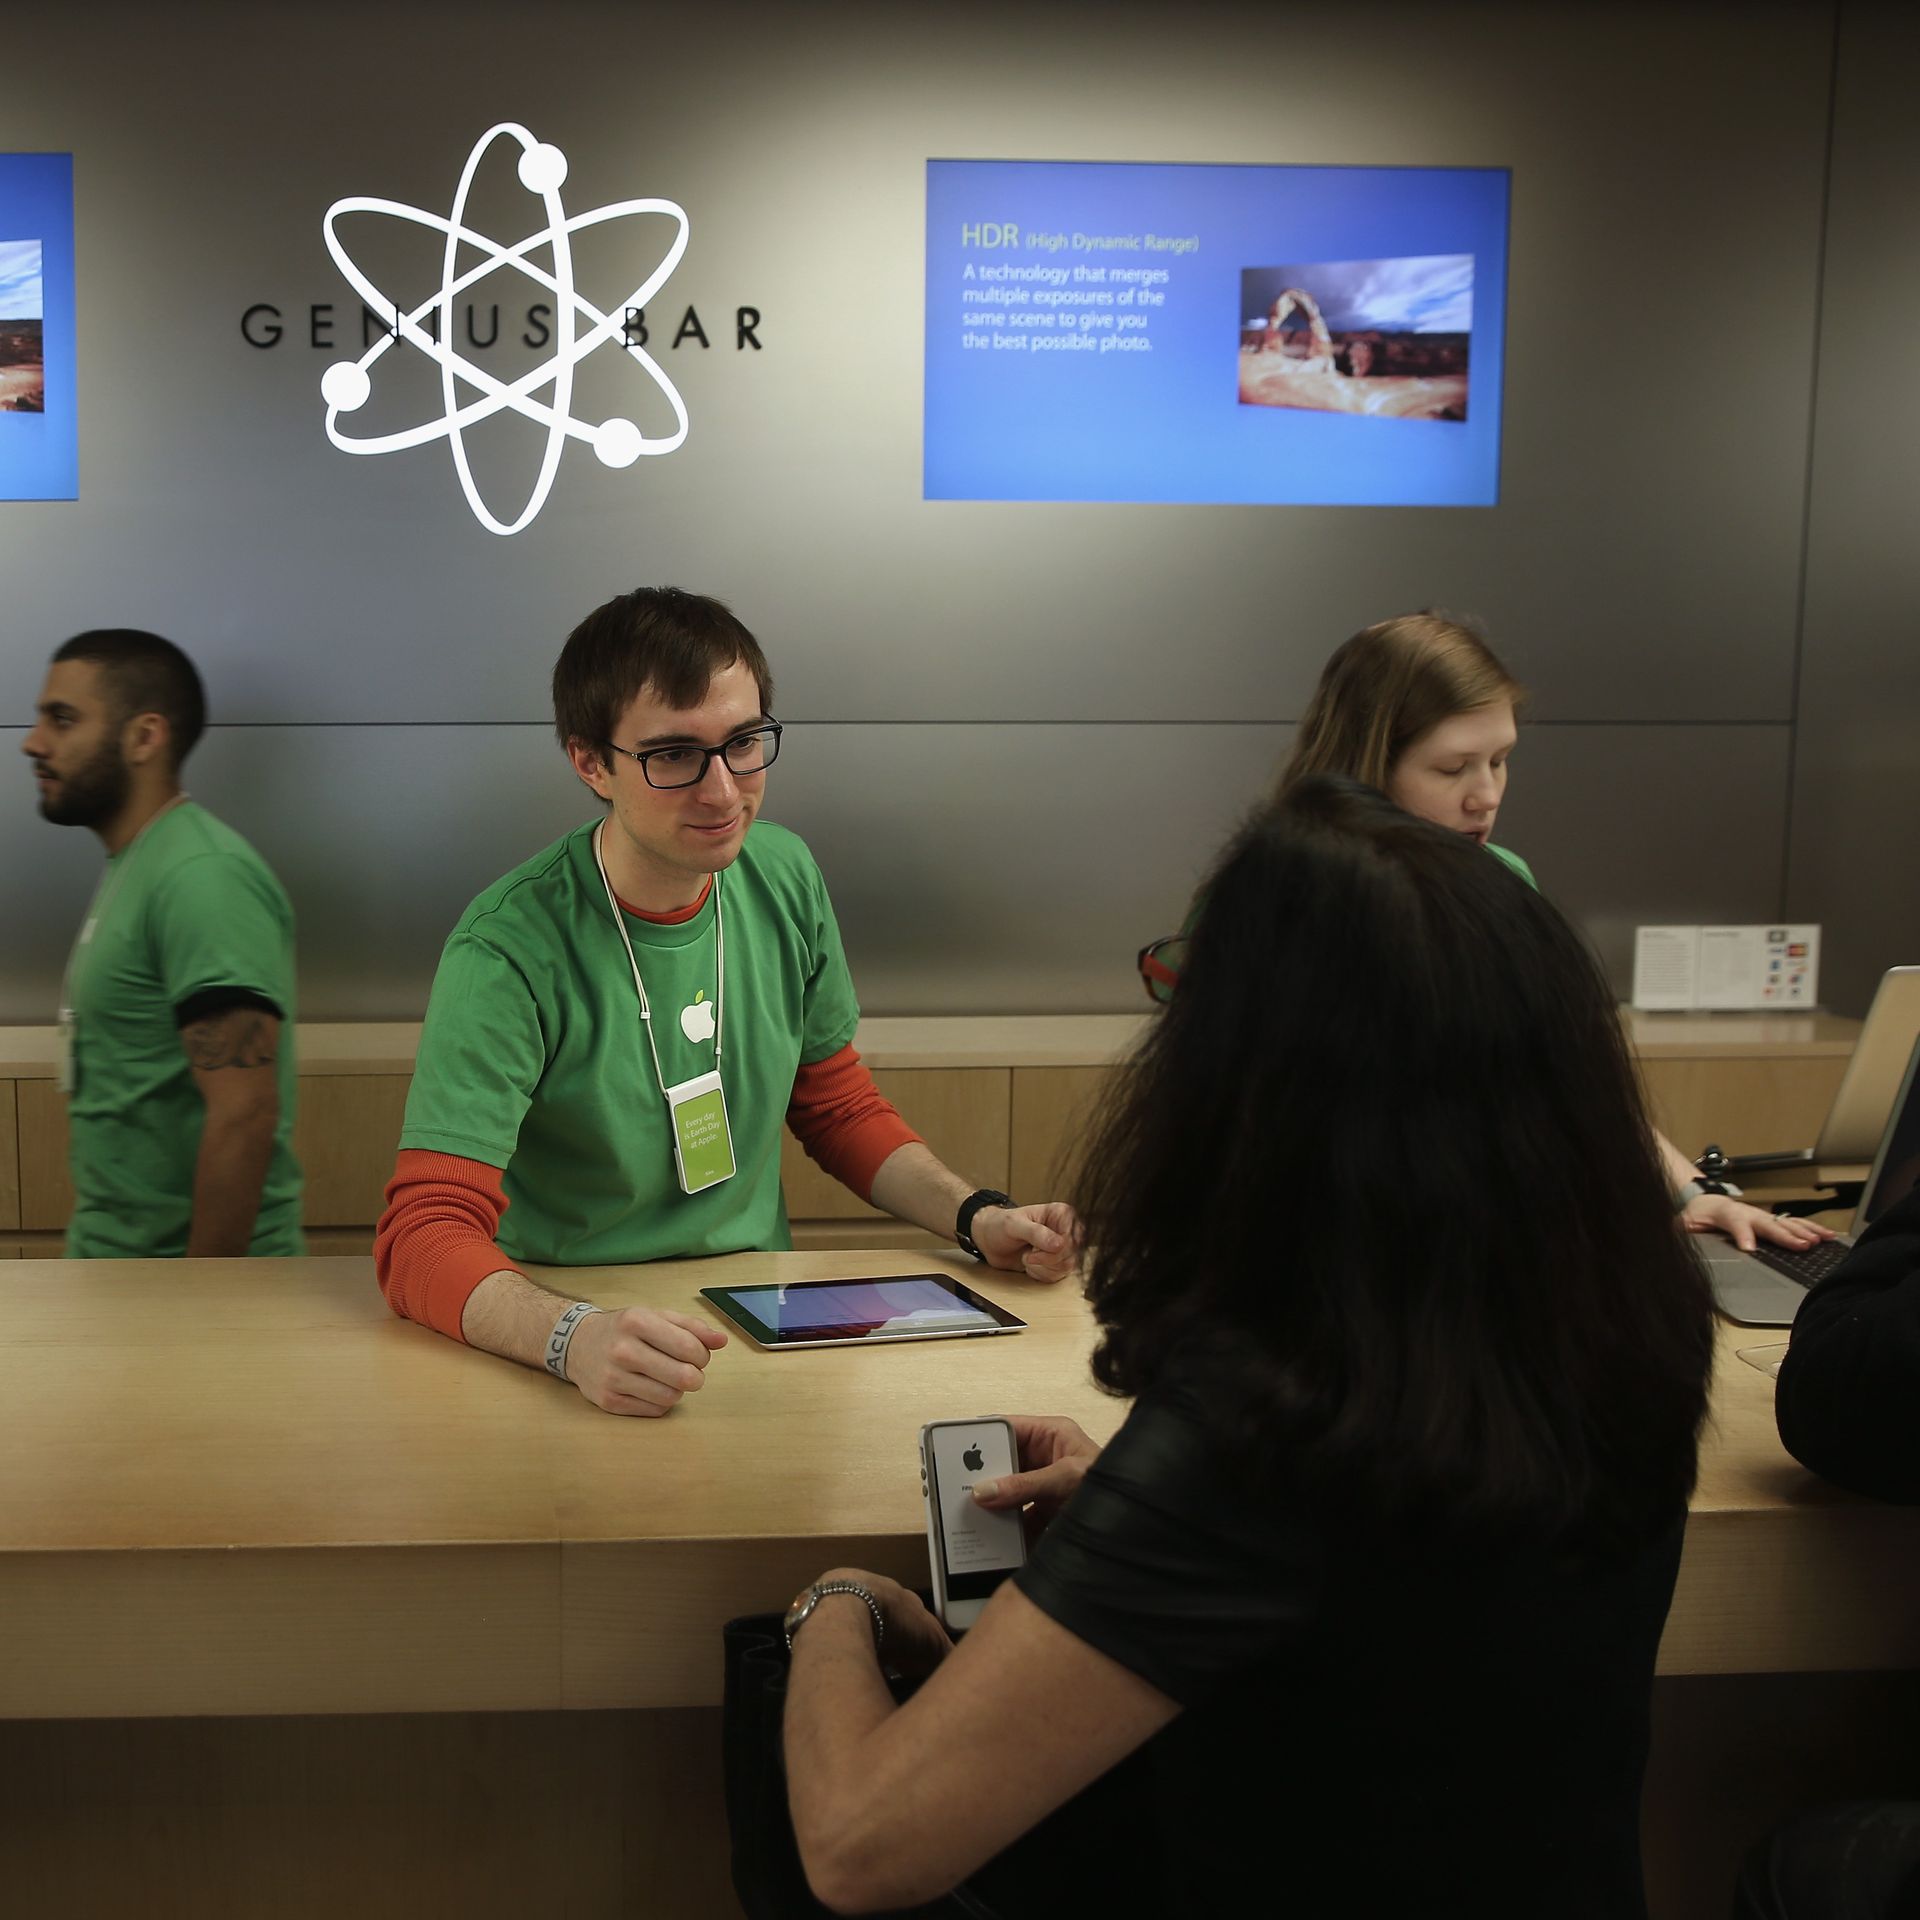 A man in a green shirt, layered over a red long-sleeved shirt, leans over a counter in front of a sign that says "Genius Bar"